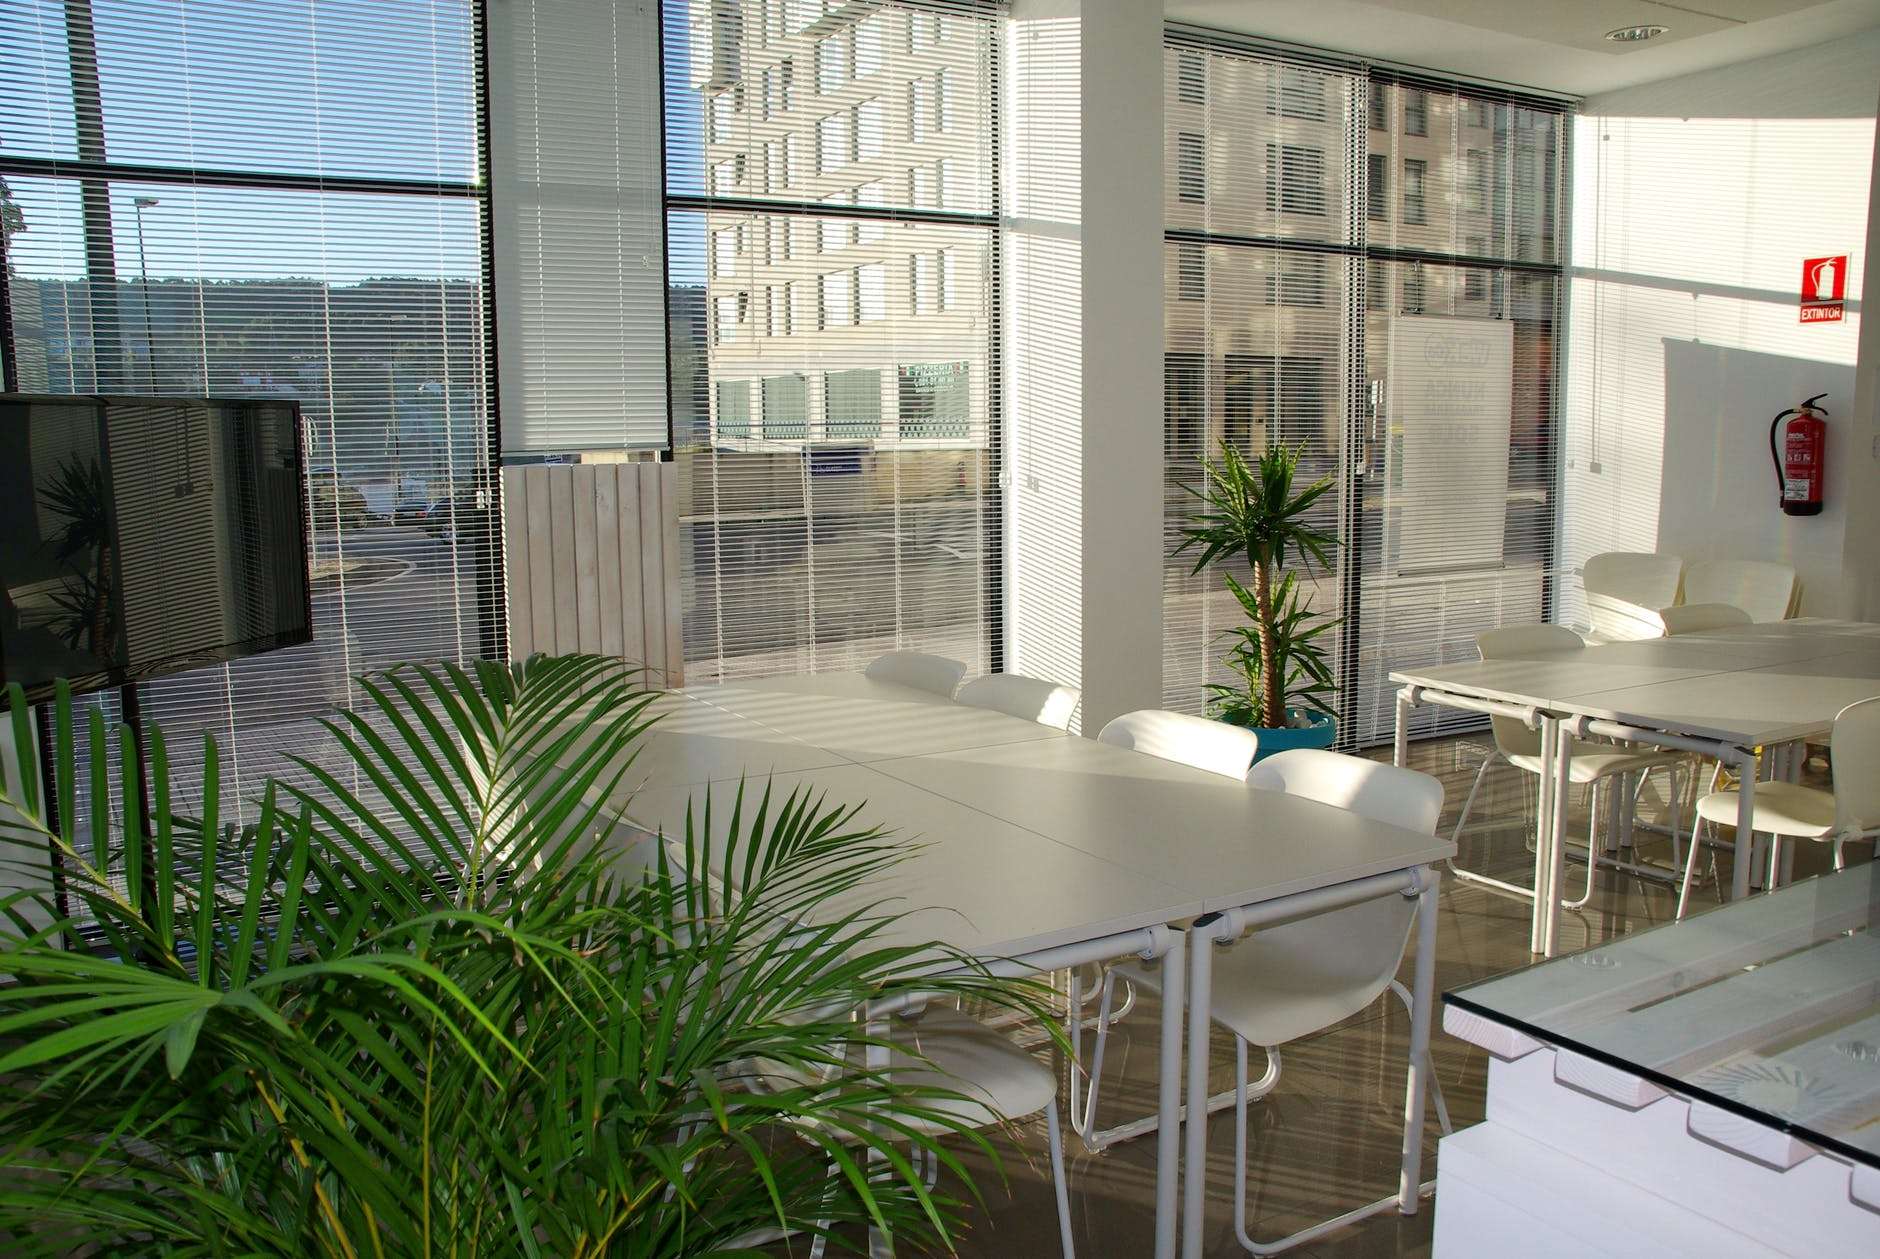 The Benefits of Natural Light in the Workplace